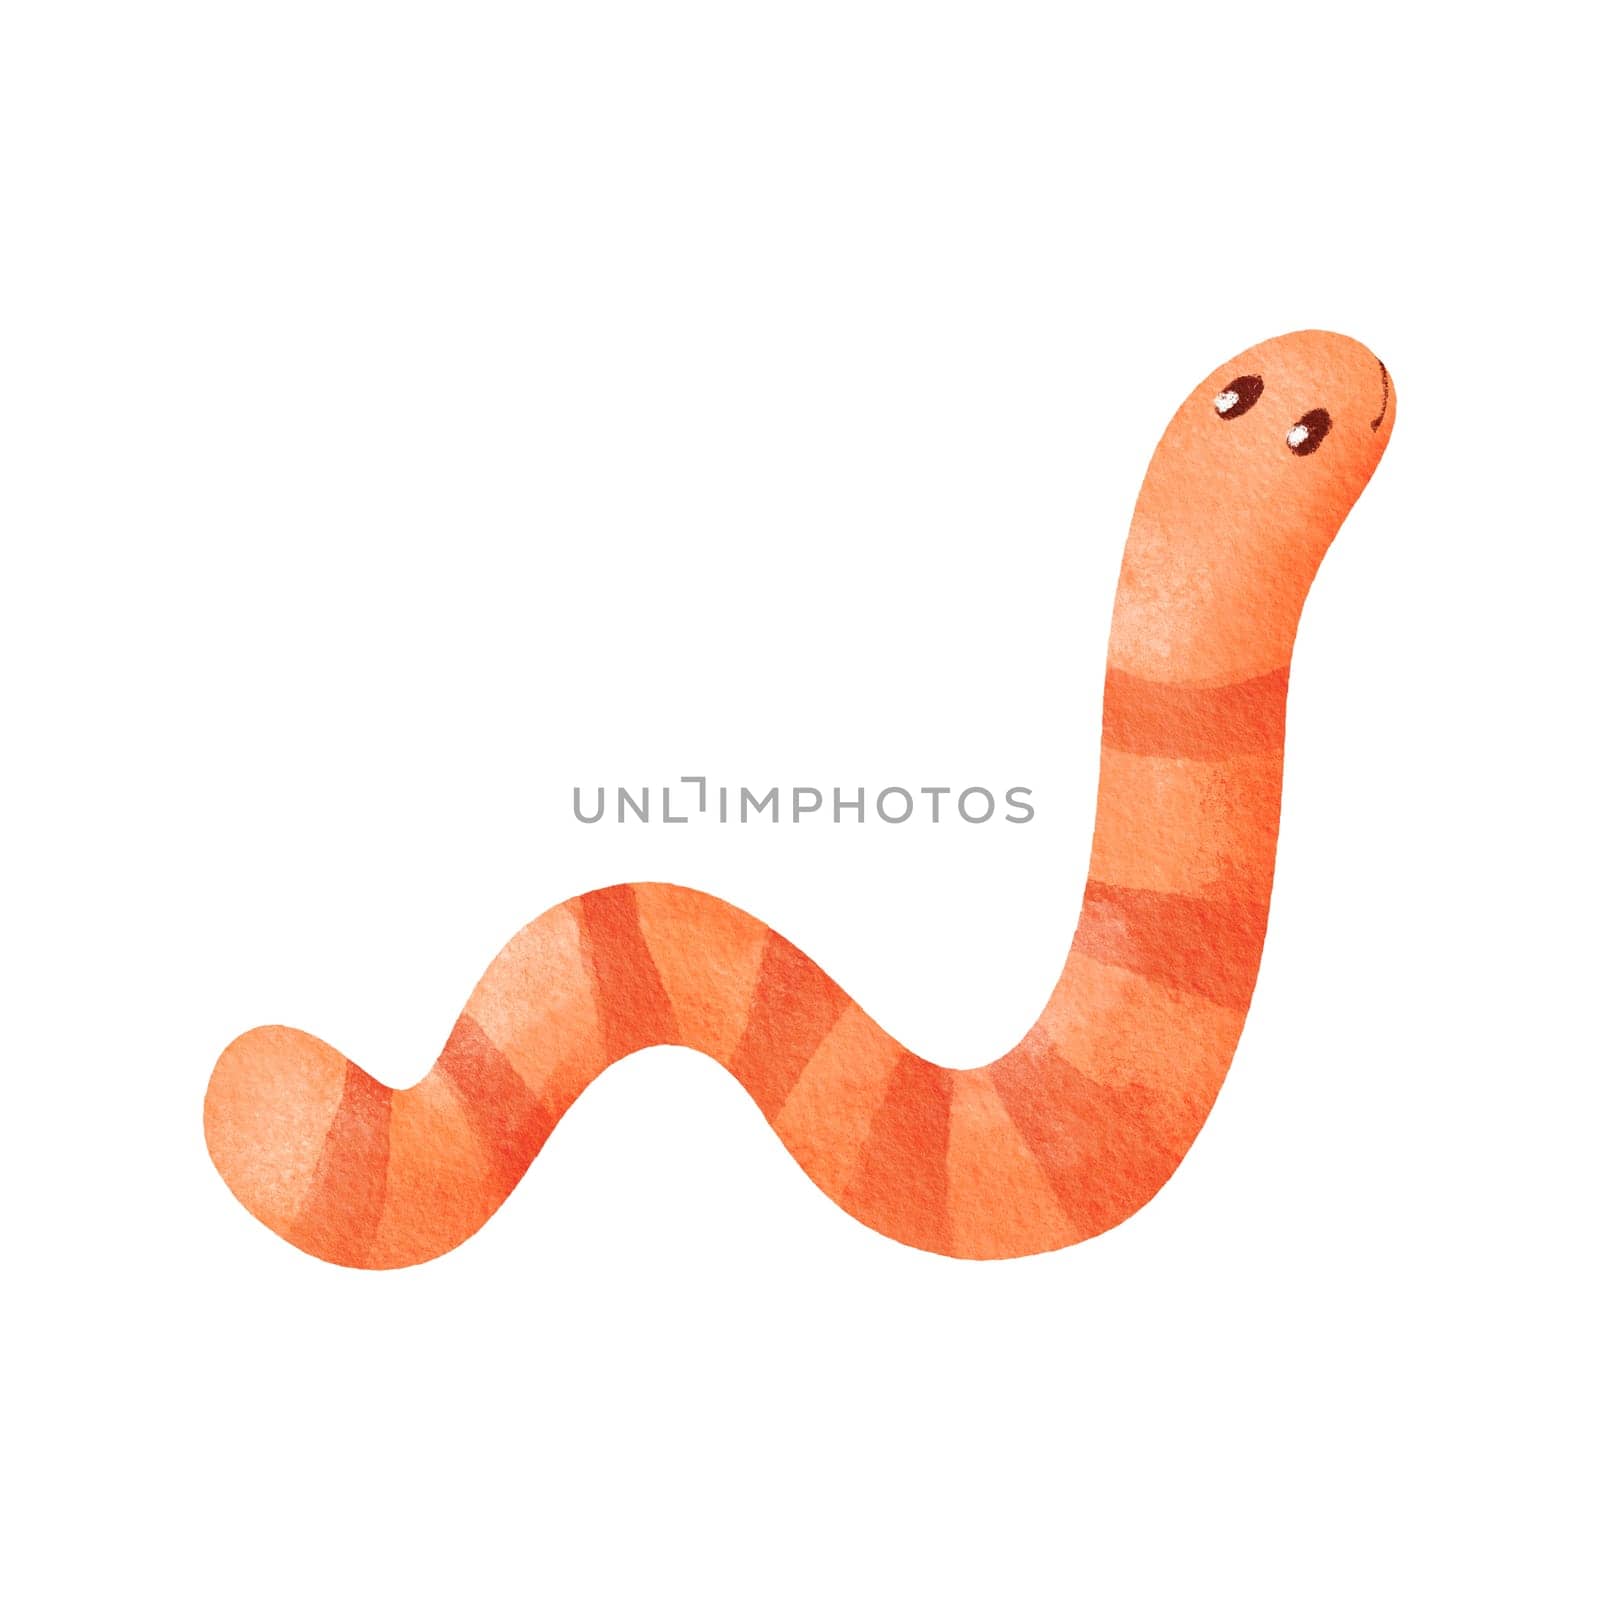 watercolor illustration of a worm. spring, nature, and the outdoors. for themes related to fishing, springtime, and insects. cartoon style for children's books, nature-themed designs.